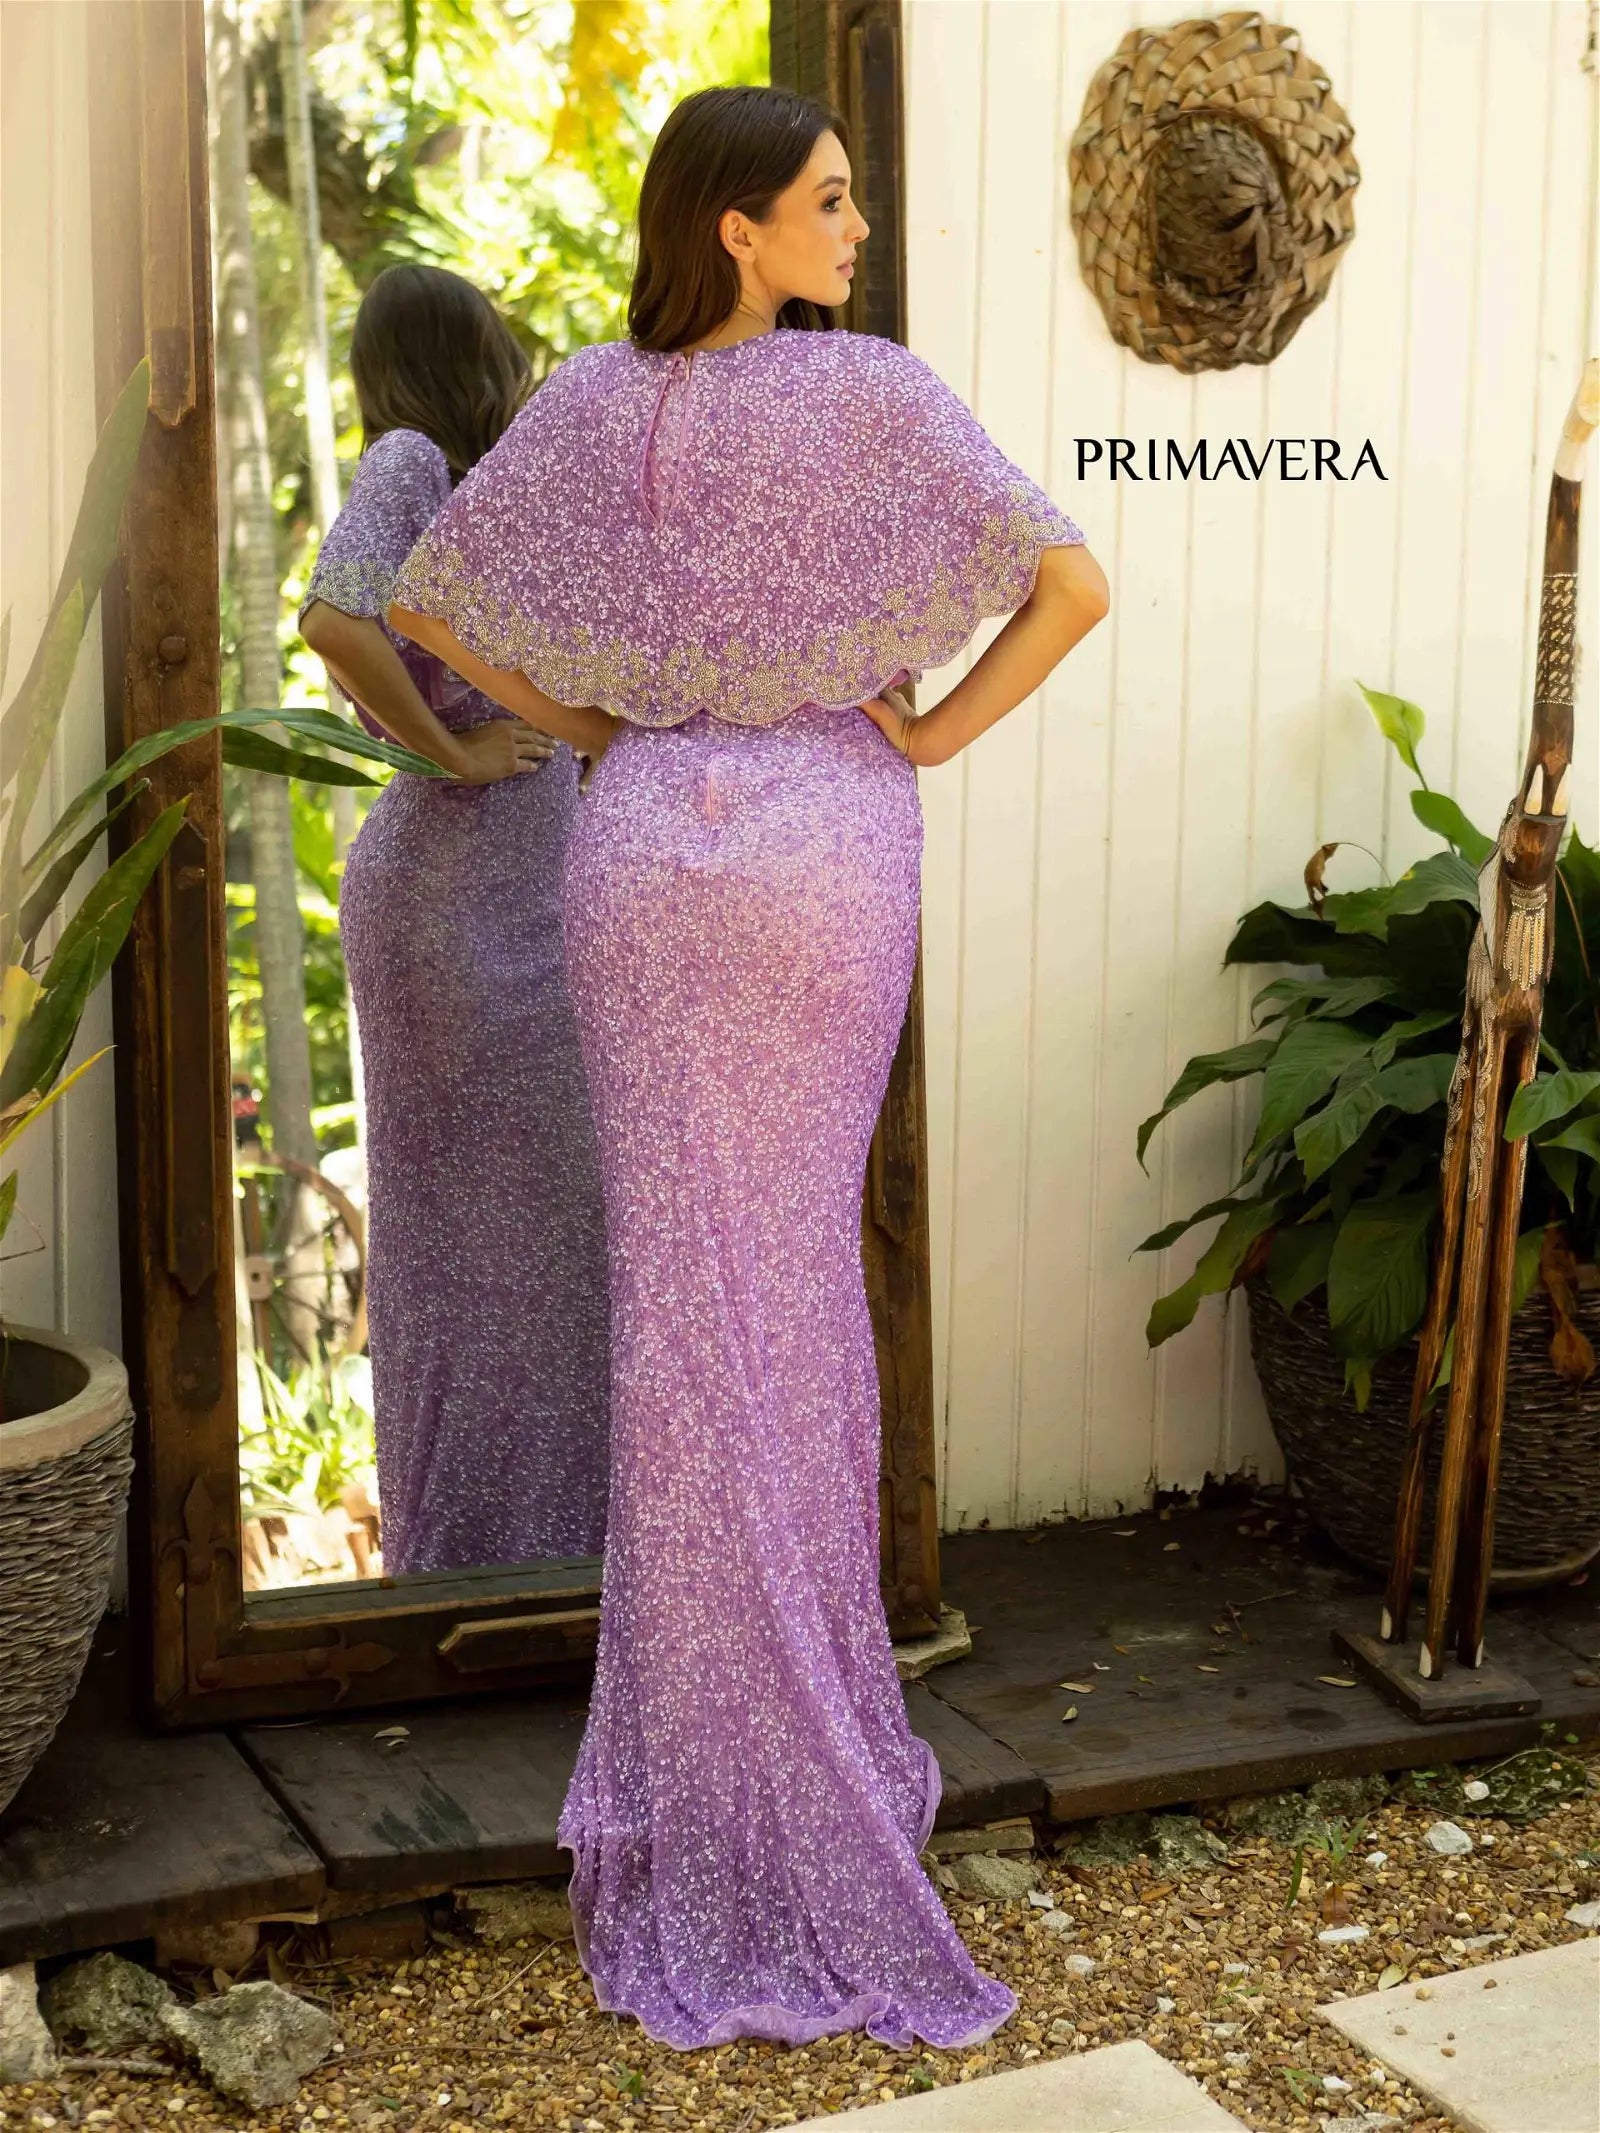 Primavera Couture 12016 Prom Dress Long Beaded Gown. This gown has a jacket that is hand beaded just like the dress.